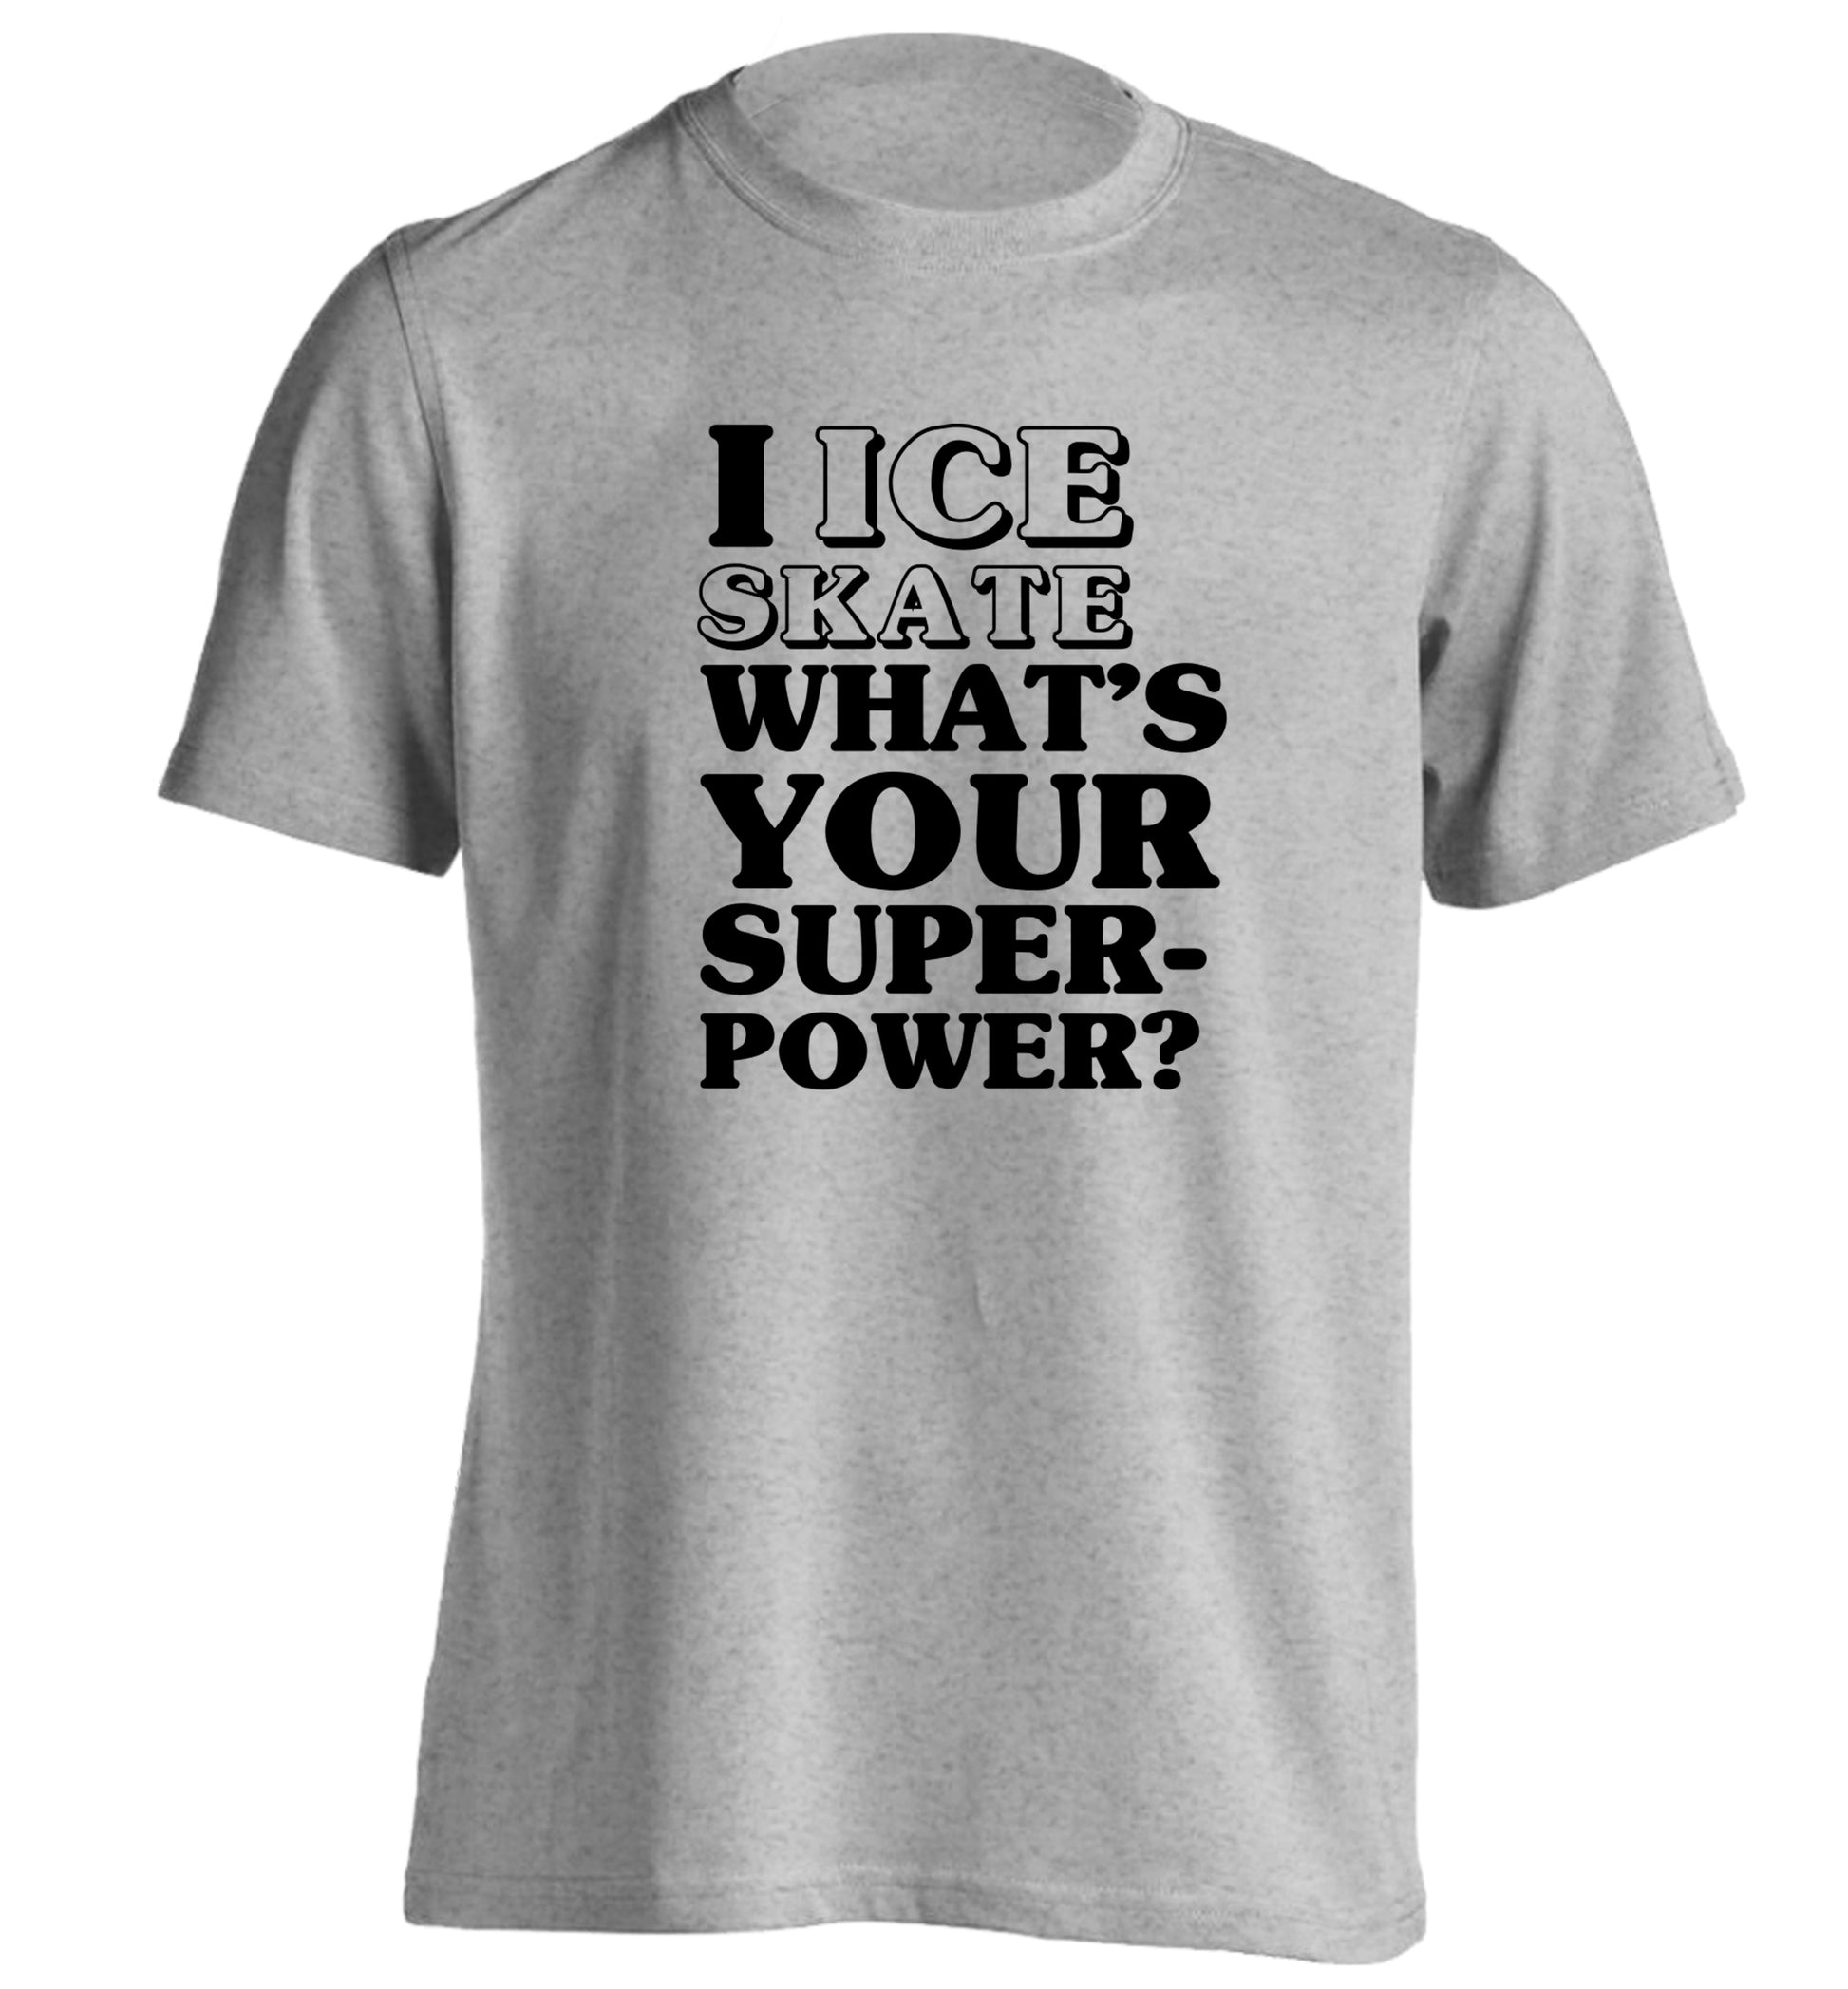 I ice skate what's your superpower? adults unisexgrey Tshirt 2XL